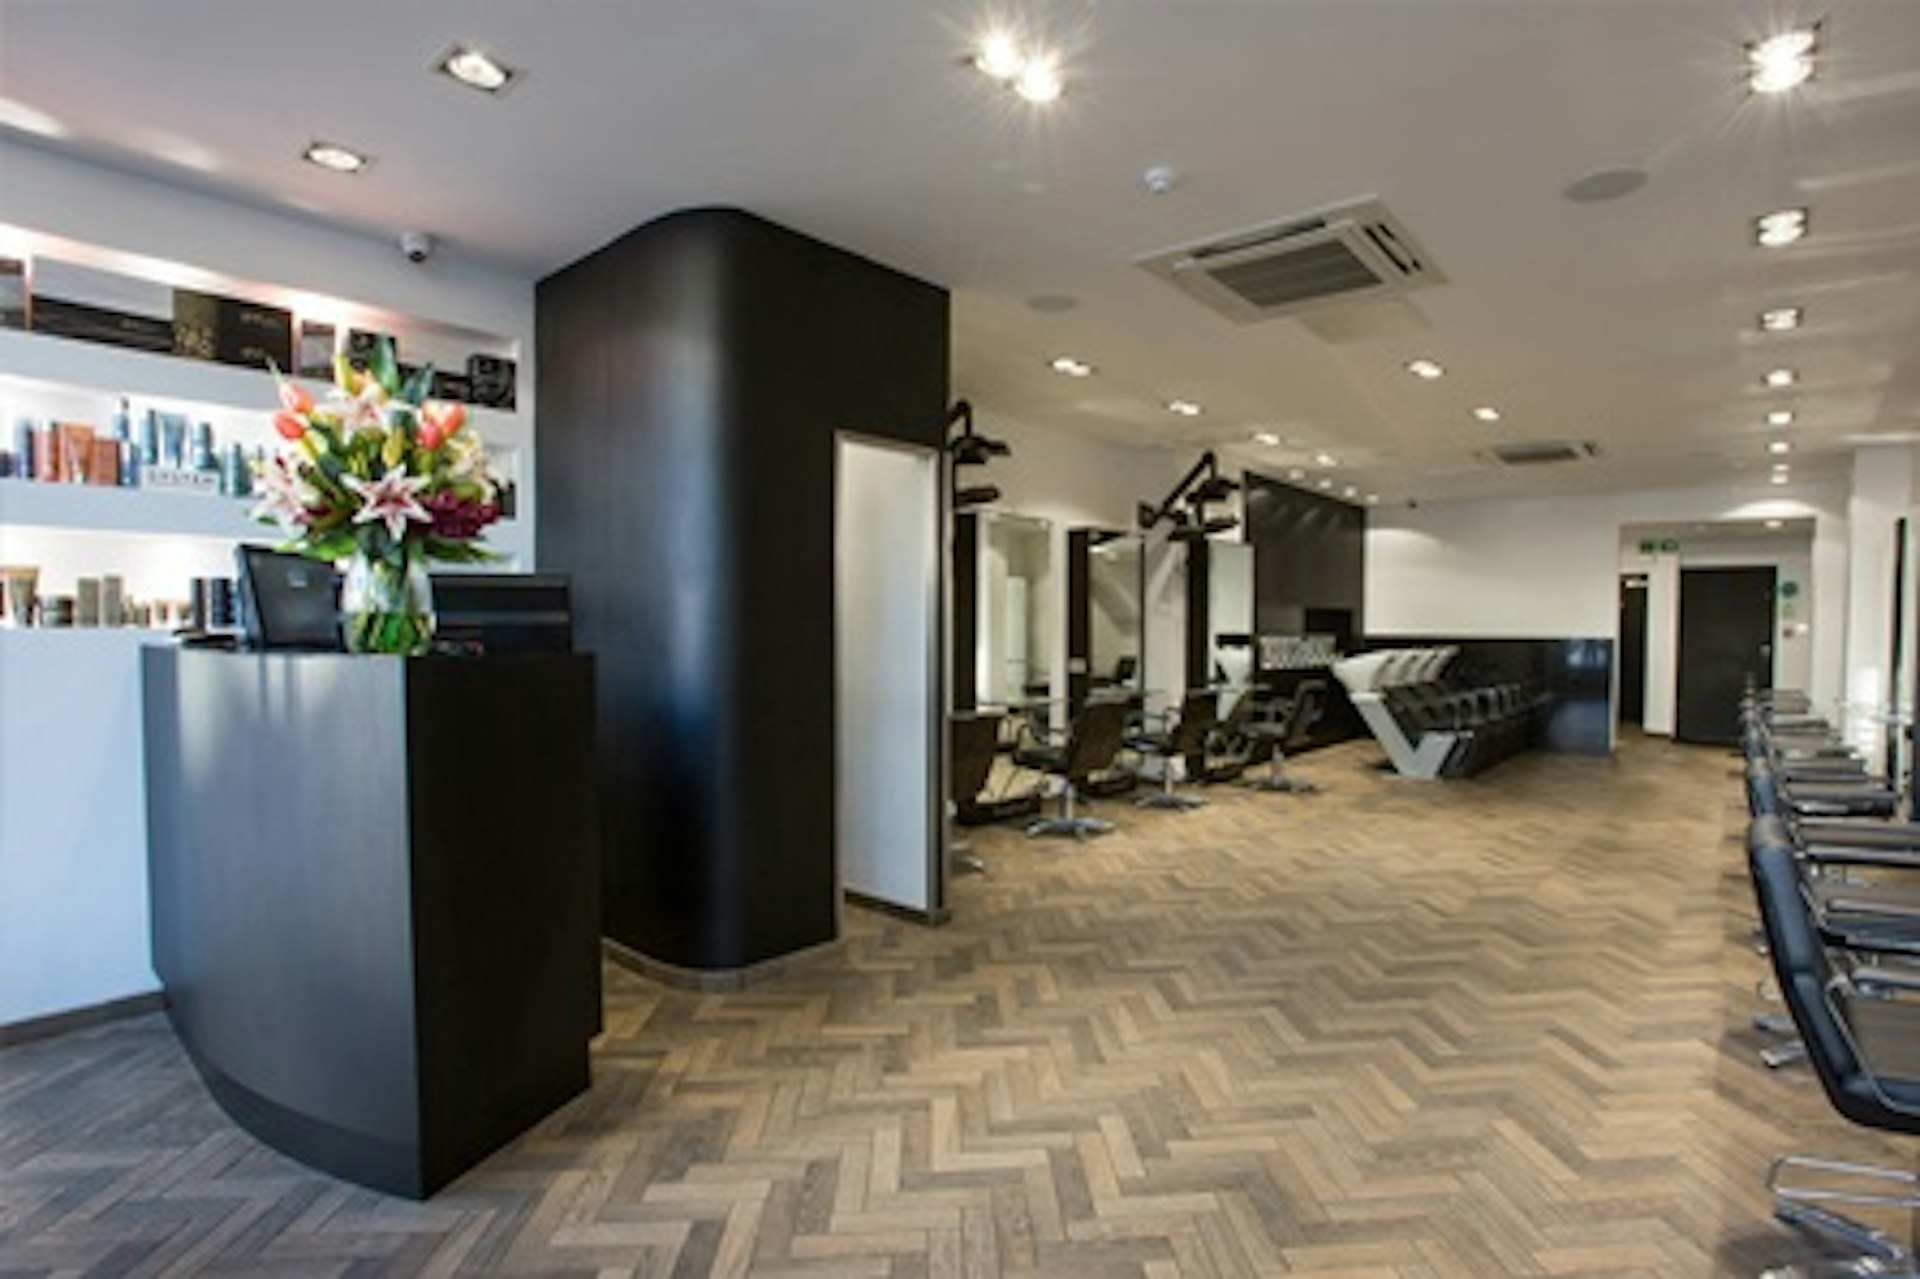 Luxury Cut and Finish with a Premier Stylist at Award-Winning HOB Salons 4